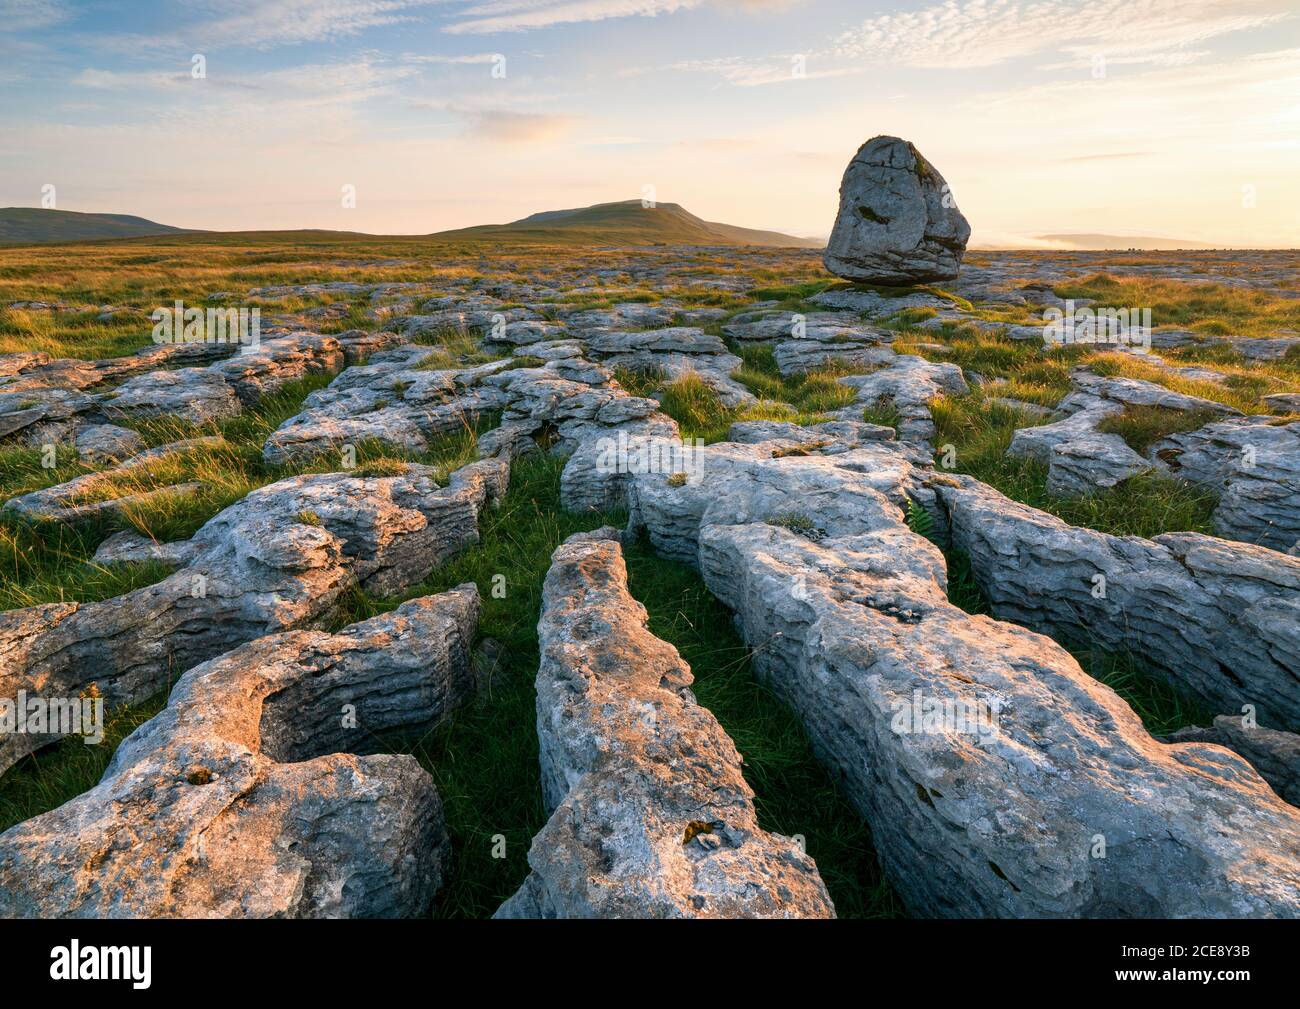 Sinous limestone pavement leads the eye towards Whernside and a distinctive erratic boulder on Scales Moor at sunrise on a blustery summer morning. Stock Photo